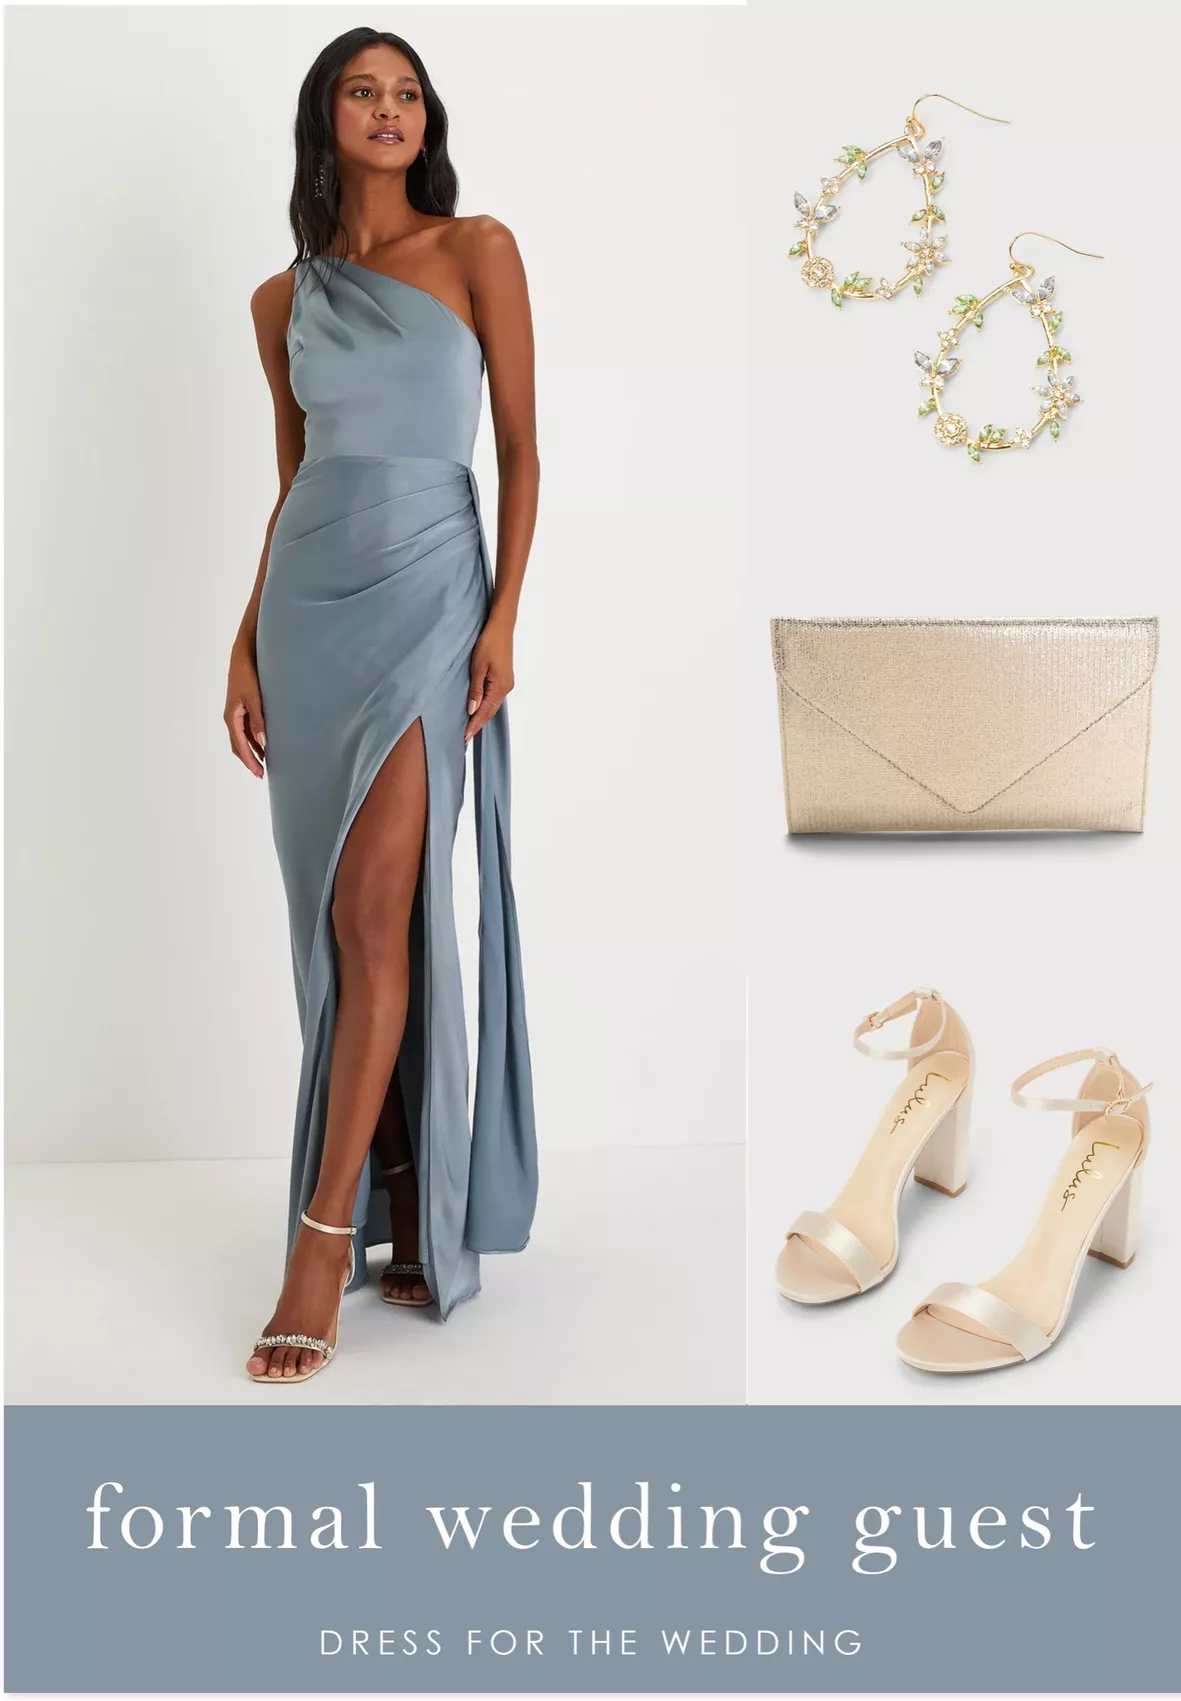 Light Blue Lace Wedding Guest Outfit - Dress for the Wedding